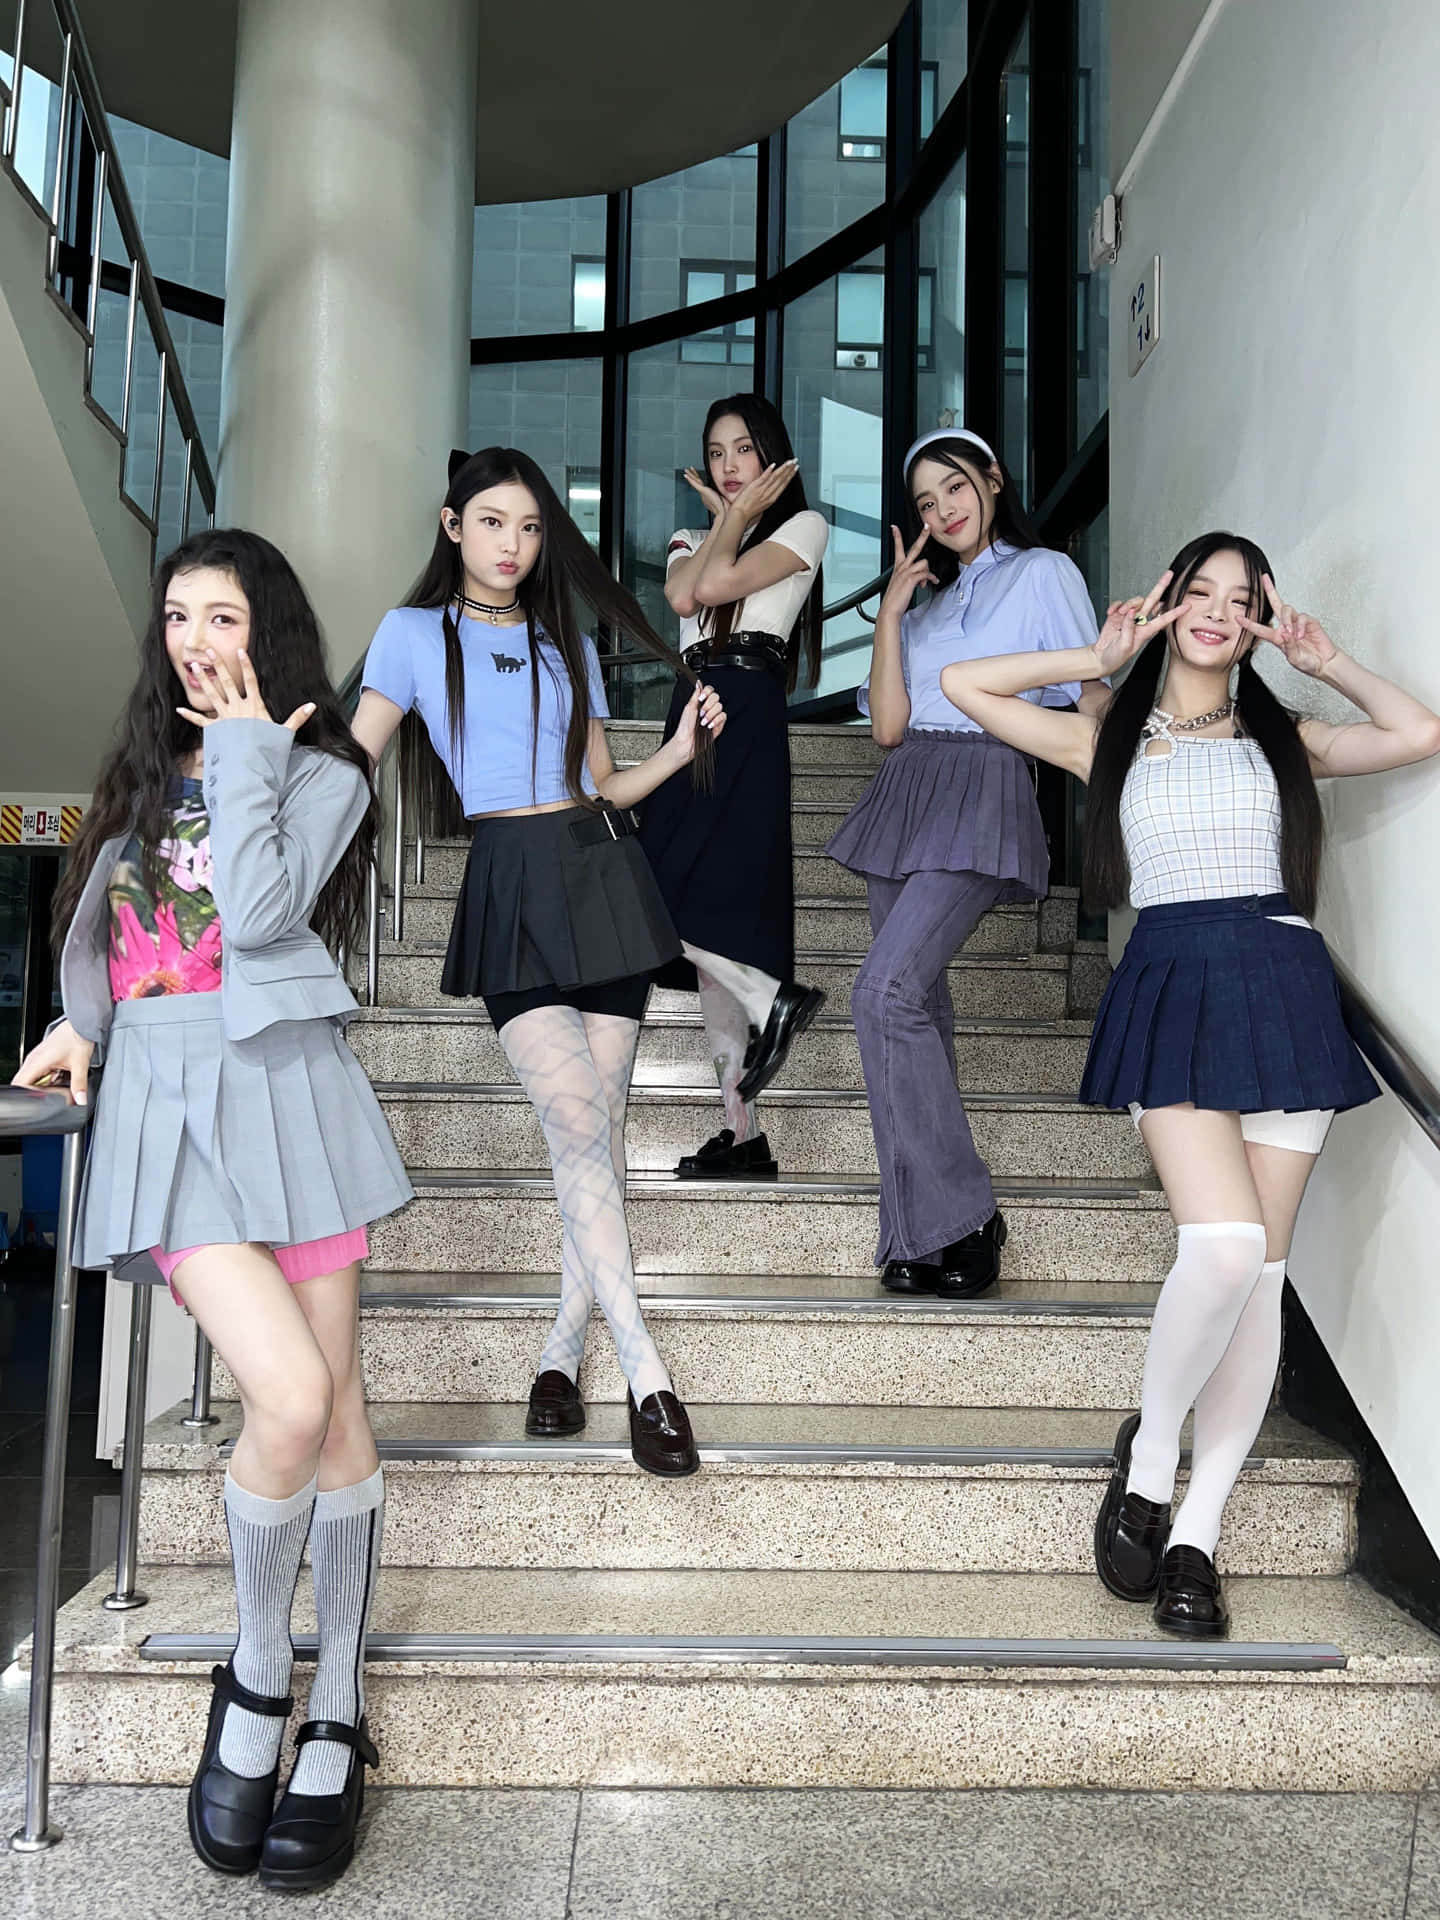 New Jeans_ Group_ Staircase_ Pose Wallpaper